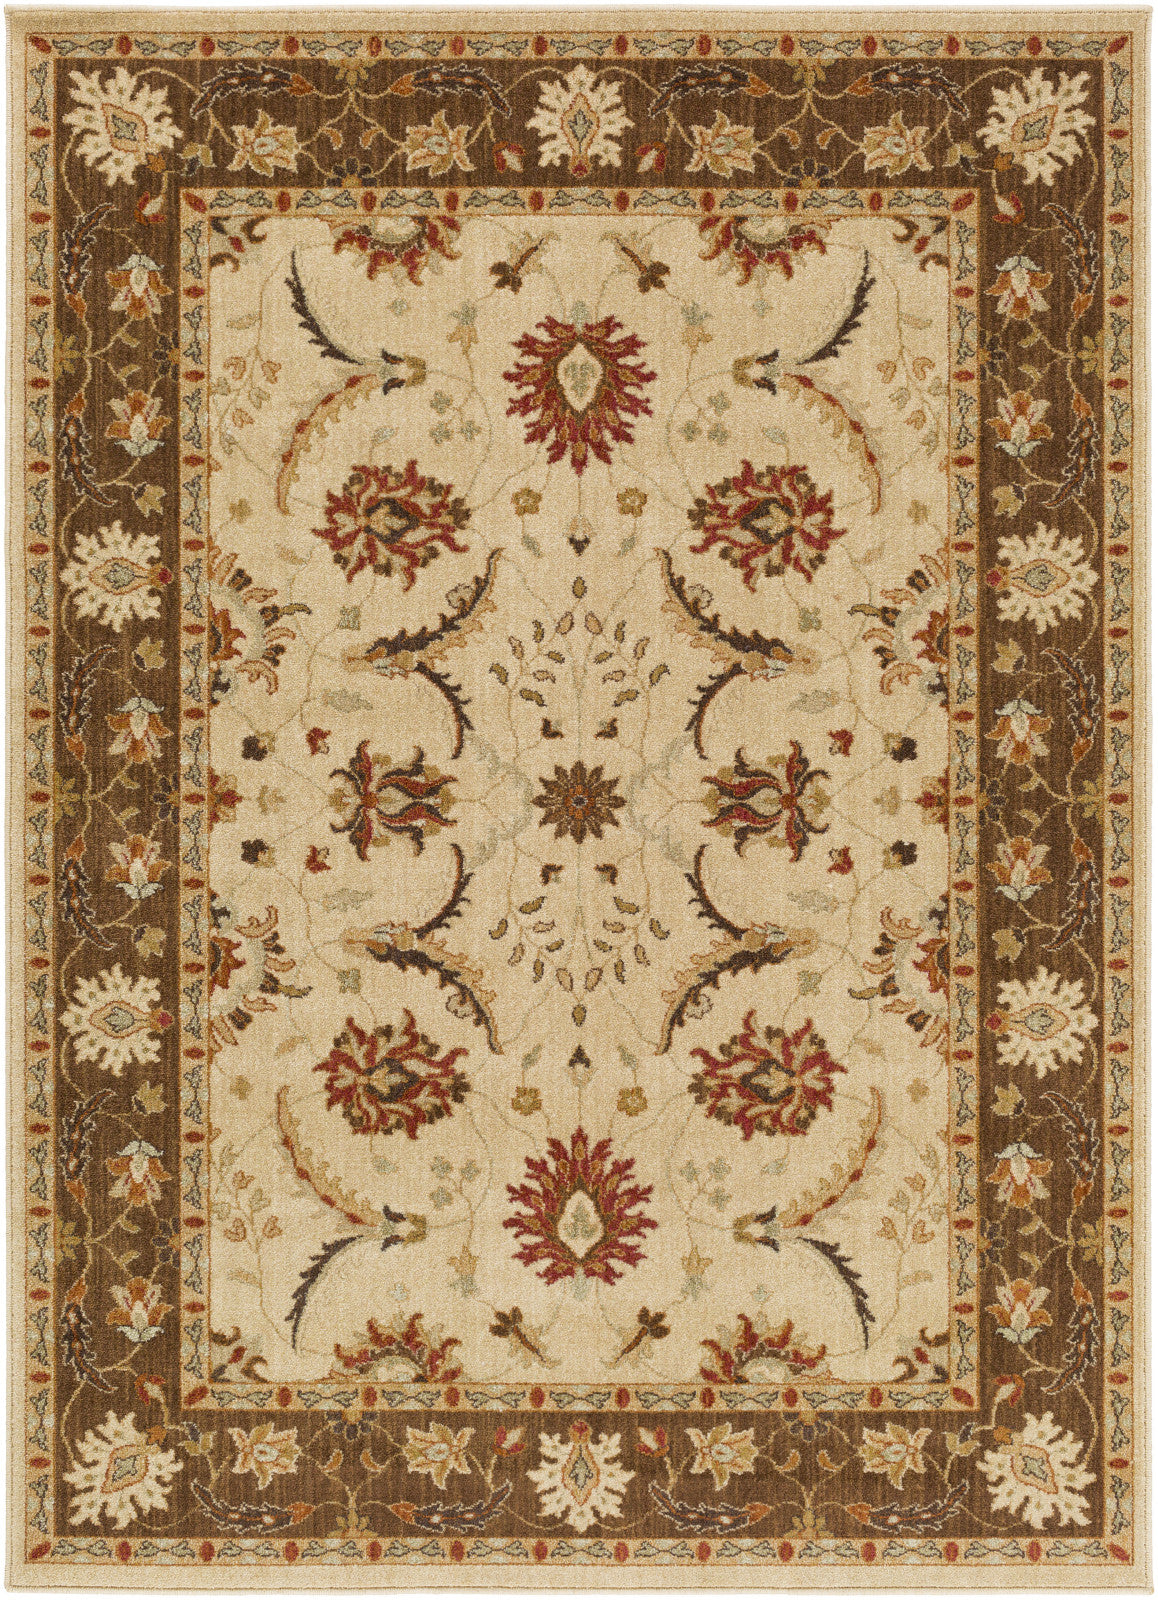 Surya Willow Lodge WLL-1009 White Area Rug by Mossy Oak